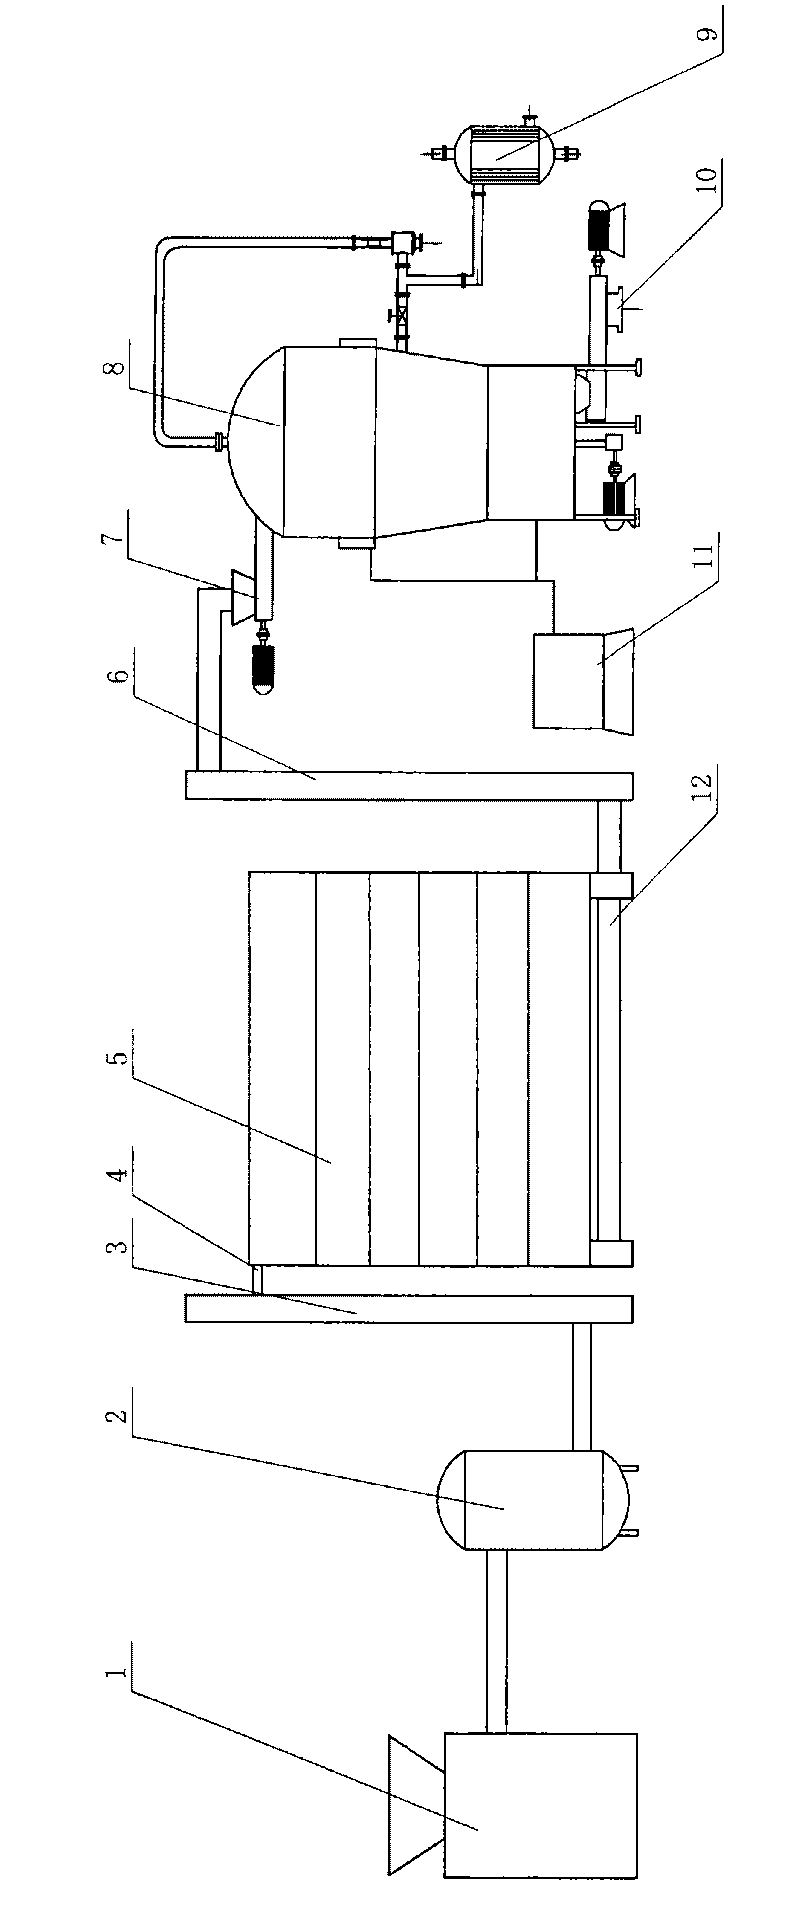 Process and system for producing ethanol through solid-state continuous fermentation and distillation of sorgo straws